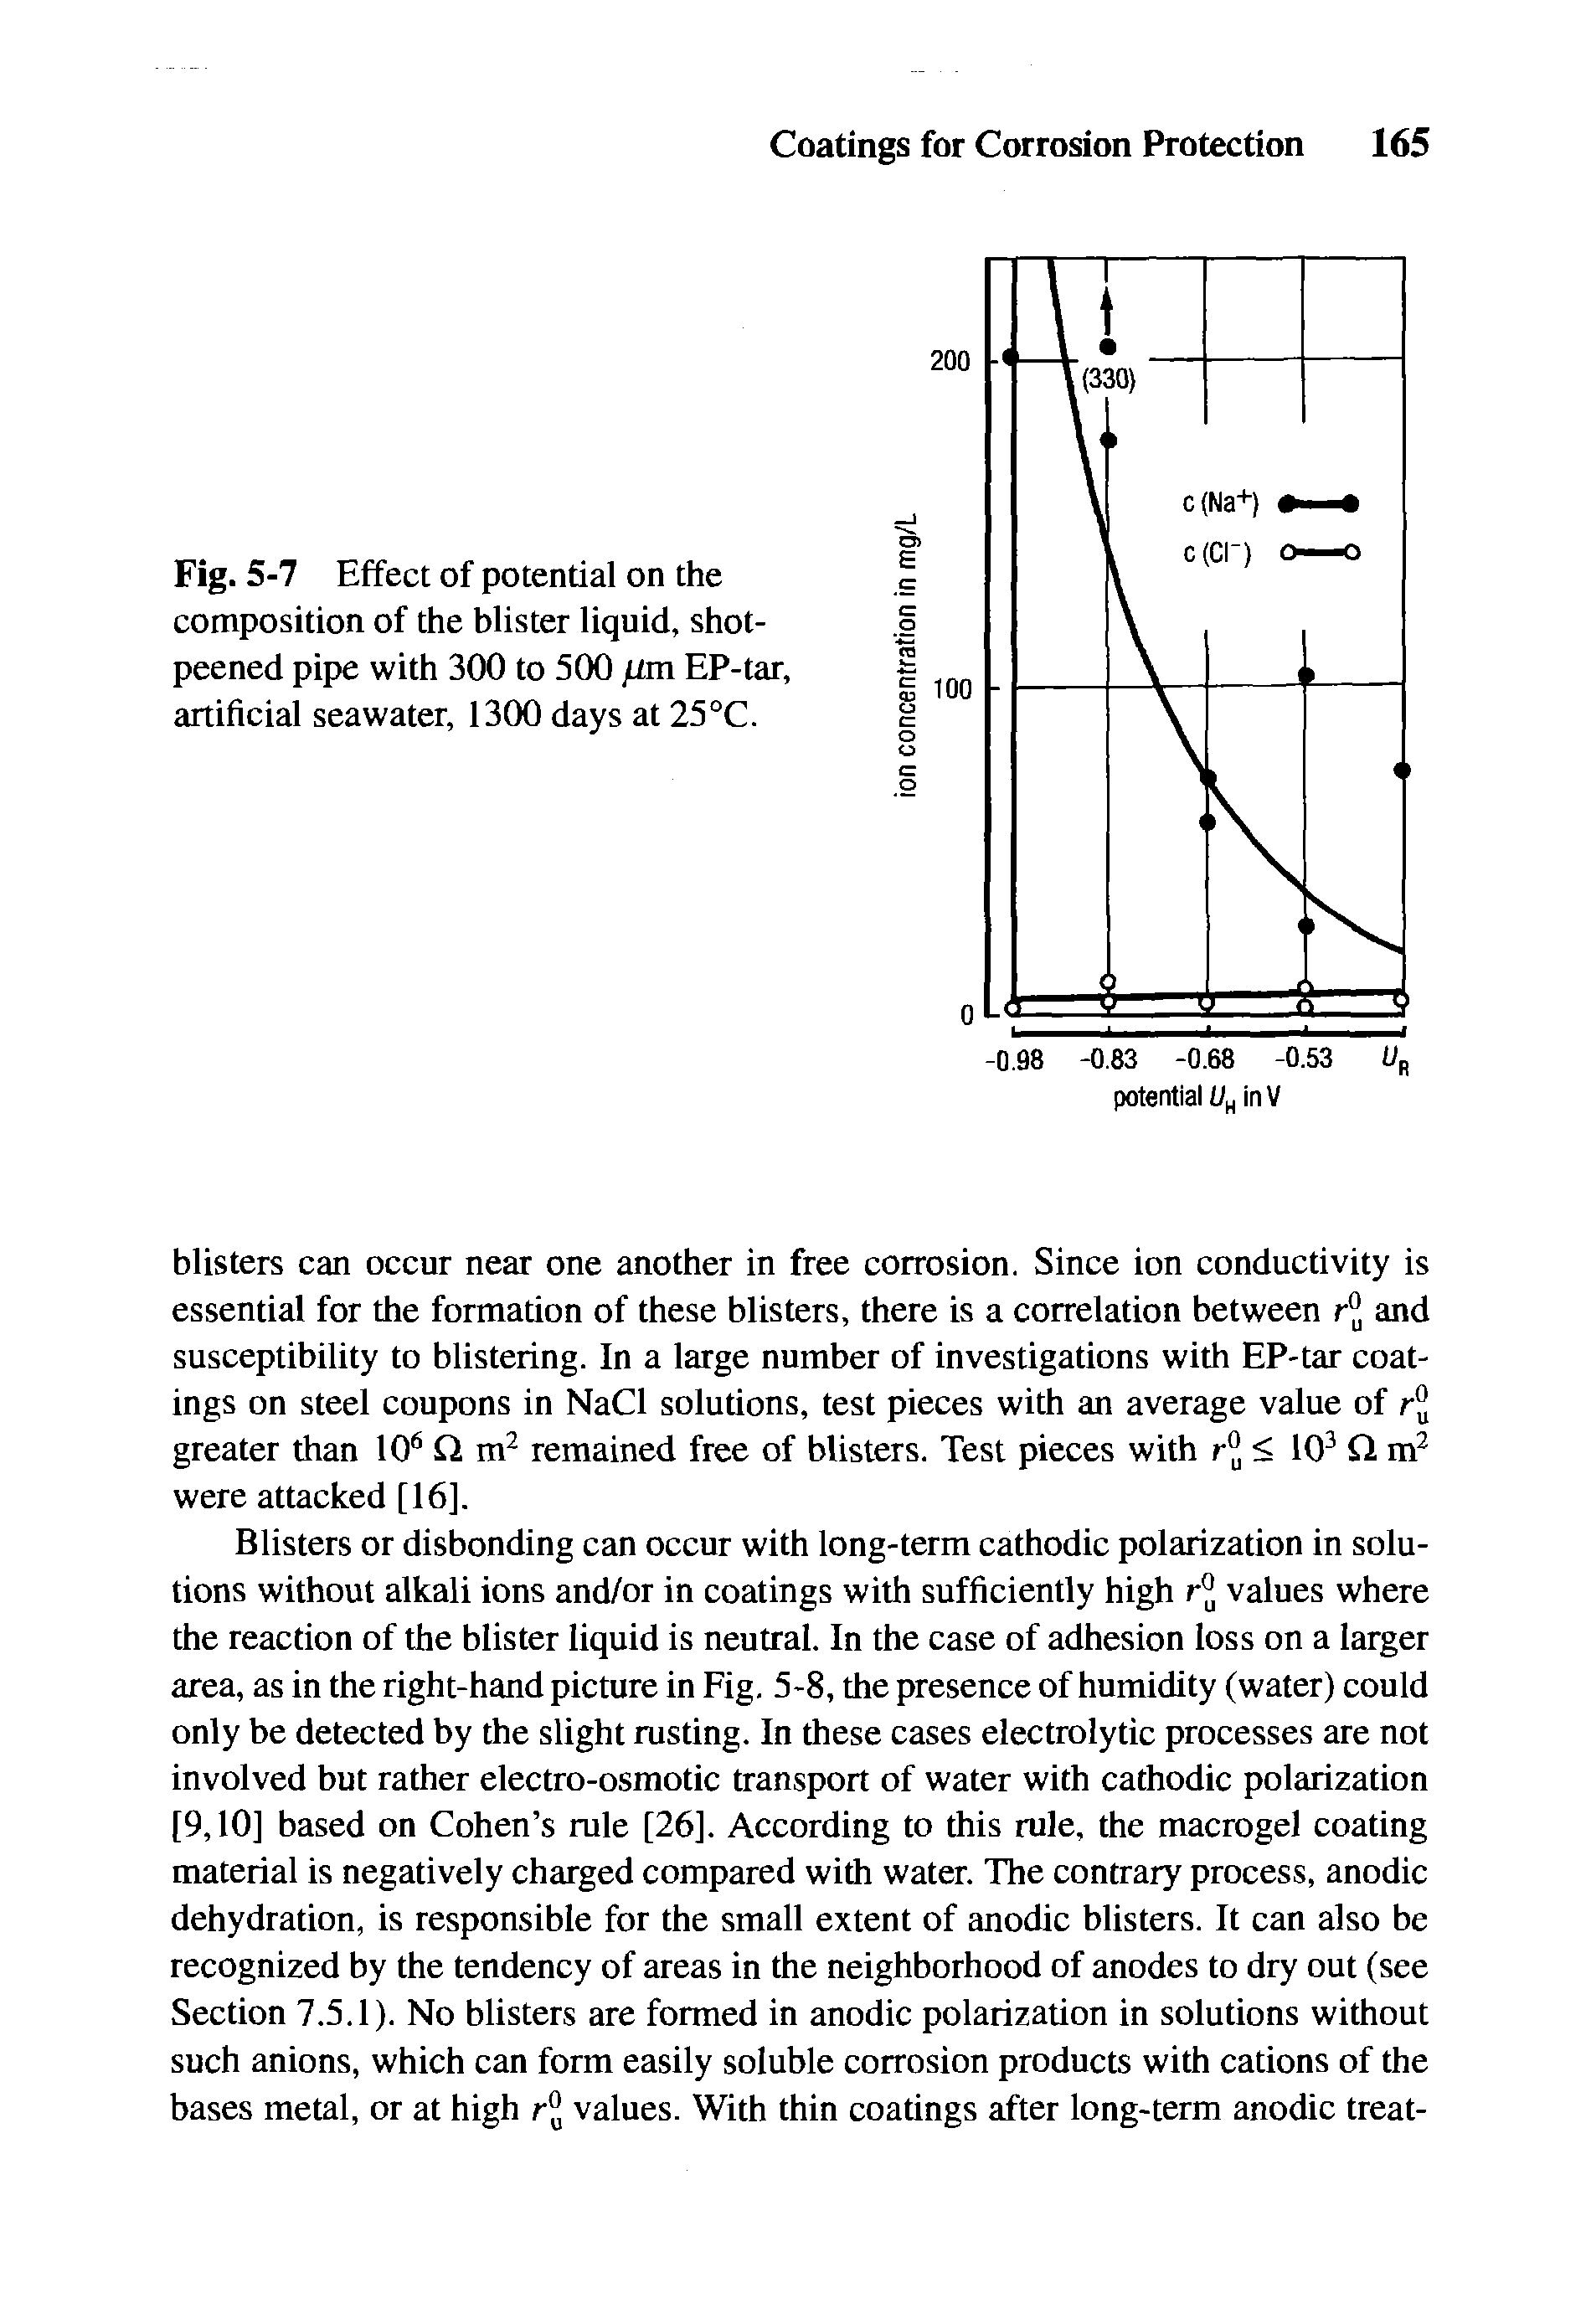 Fig. 5-7 Effect of potential on the composition of the blister liquid, shot-peened pipe with 300 to 500 jim EP-tar, artificial seawater, 1300 days at 25°C.